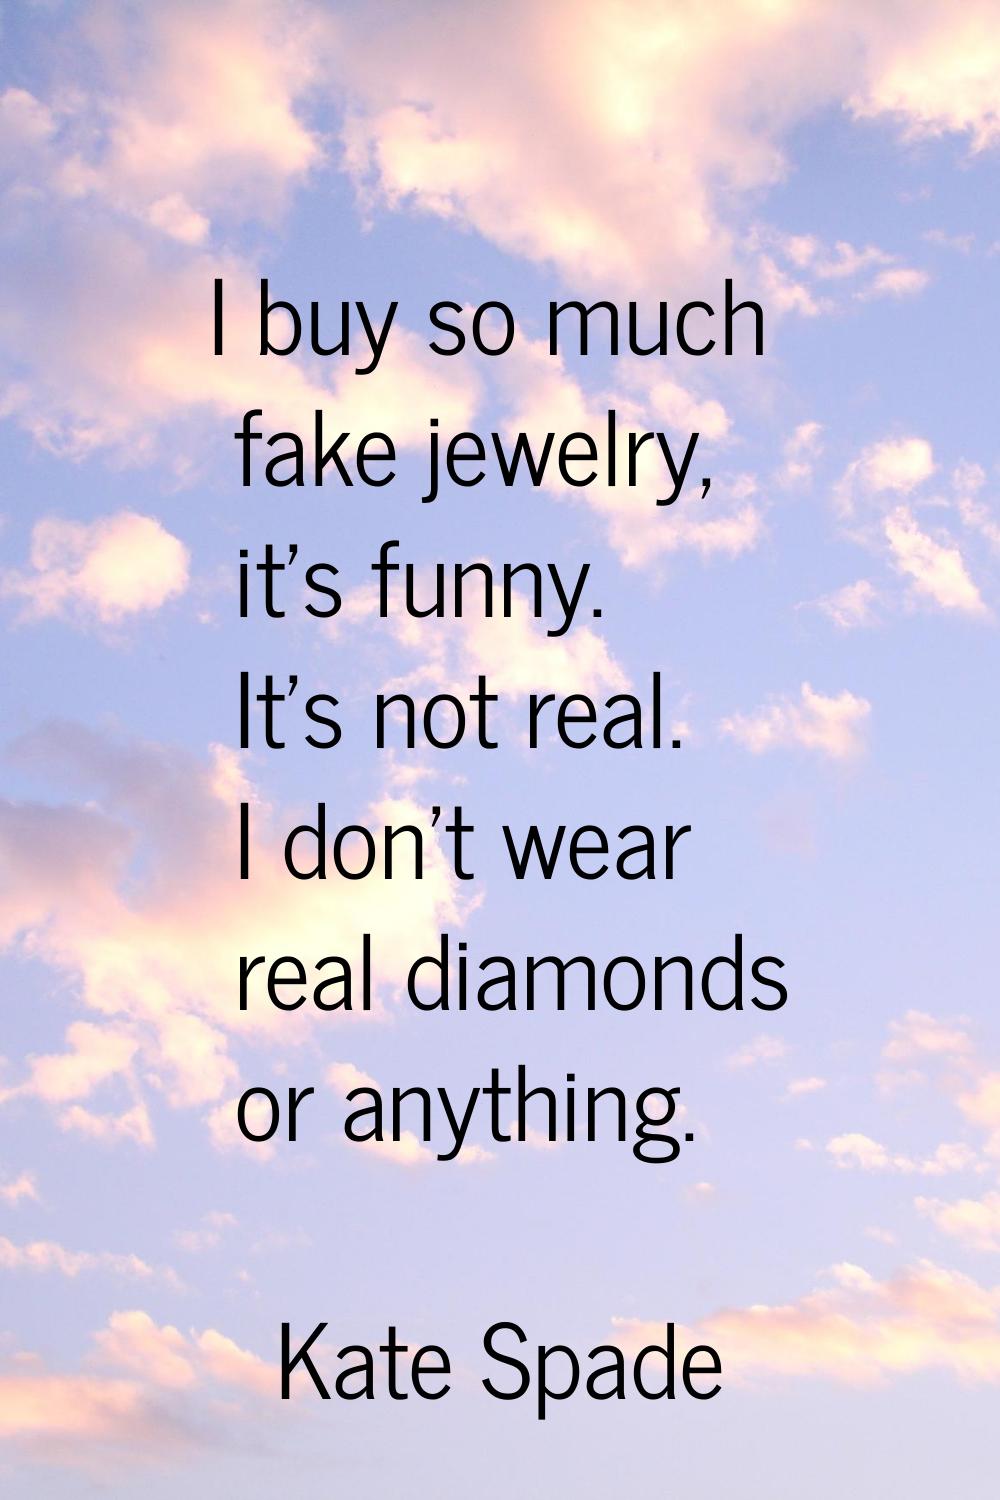 I buy so much fake jewelry, it's funny. It's not real. I don't wear real diamonds or anything.